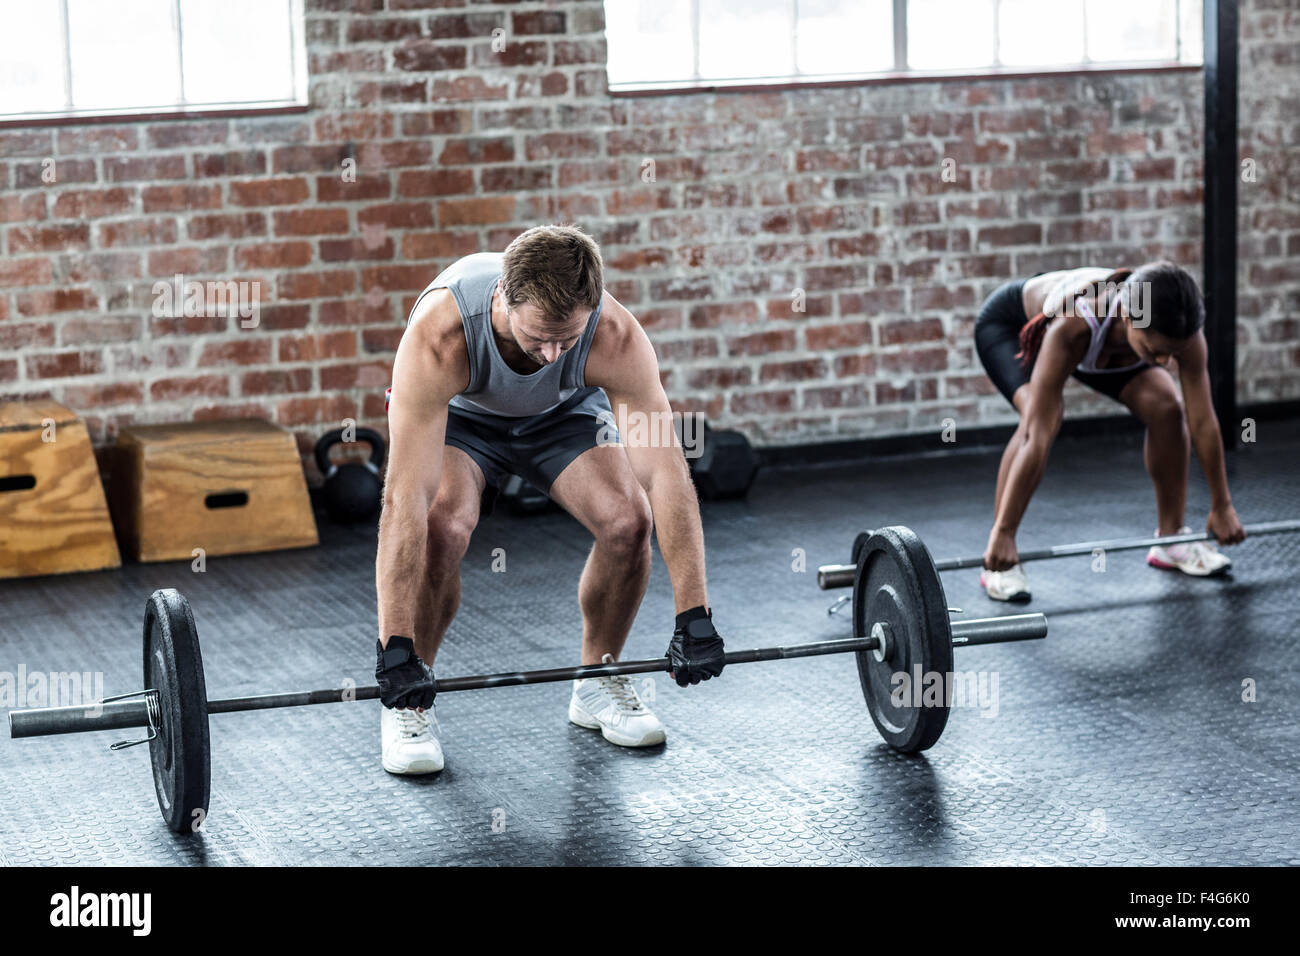 Muscular couple lifting weight together Stock Photo